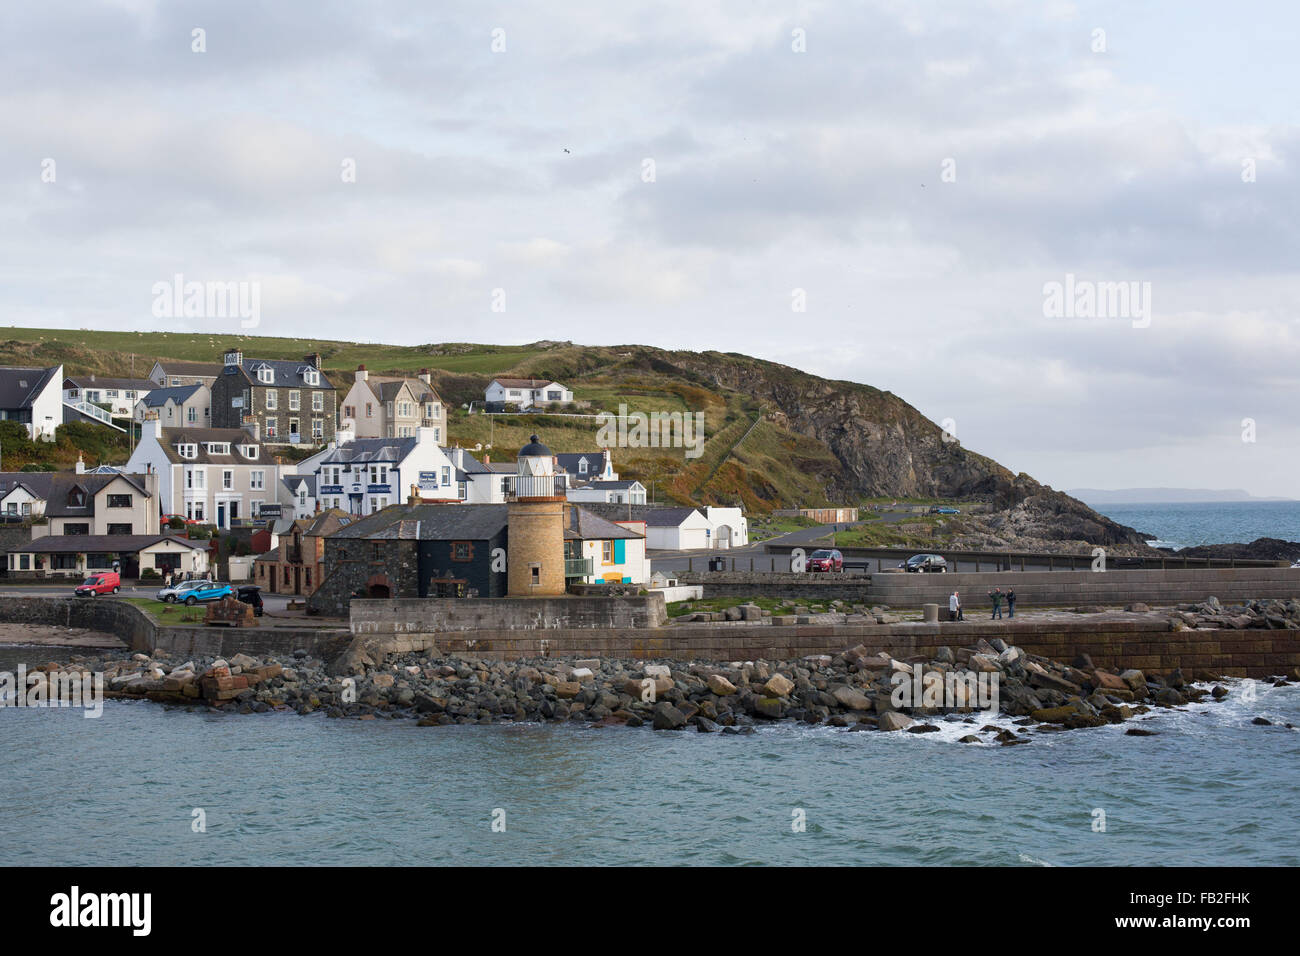 The late afternoon sunshine hits the coastline at Portpatrick in Dumfries and Galloway, Scotland, Britain. Stock Photo